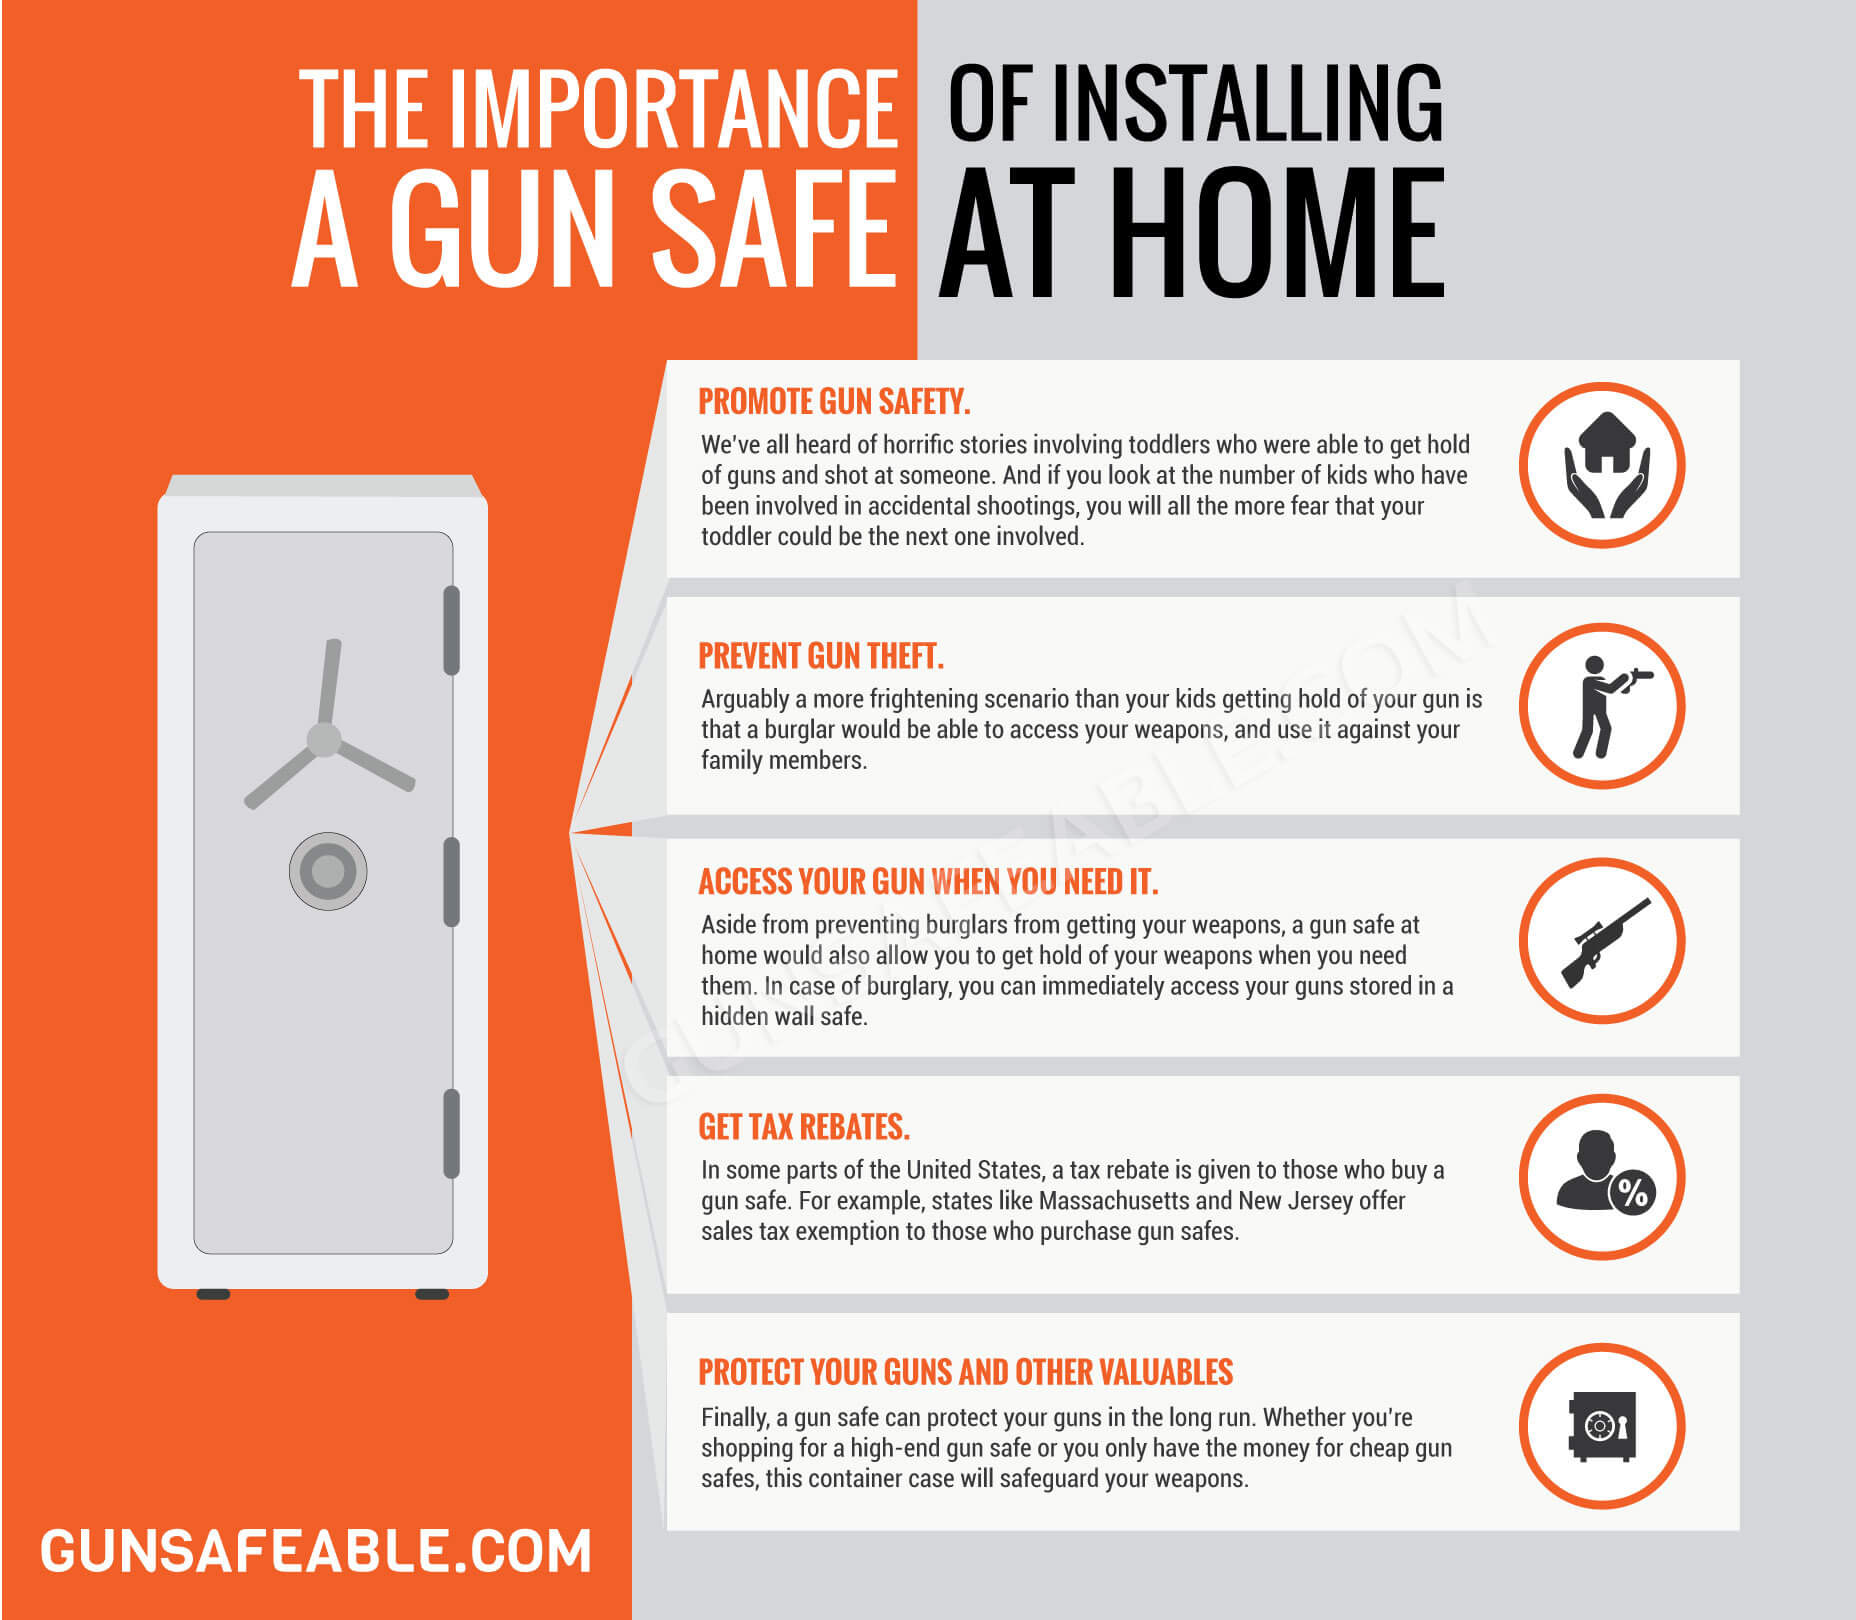 [INFOGRAPHIC] The Importance of Installing a Gun Safe at Home